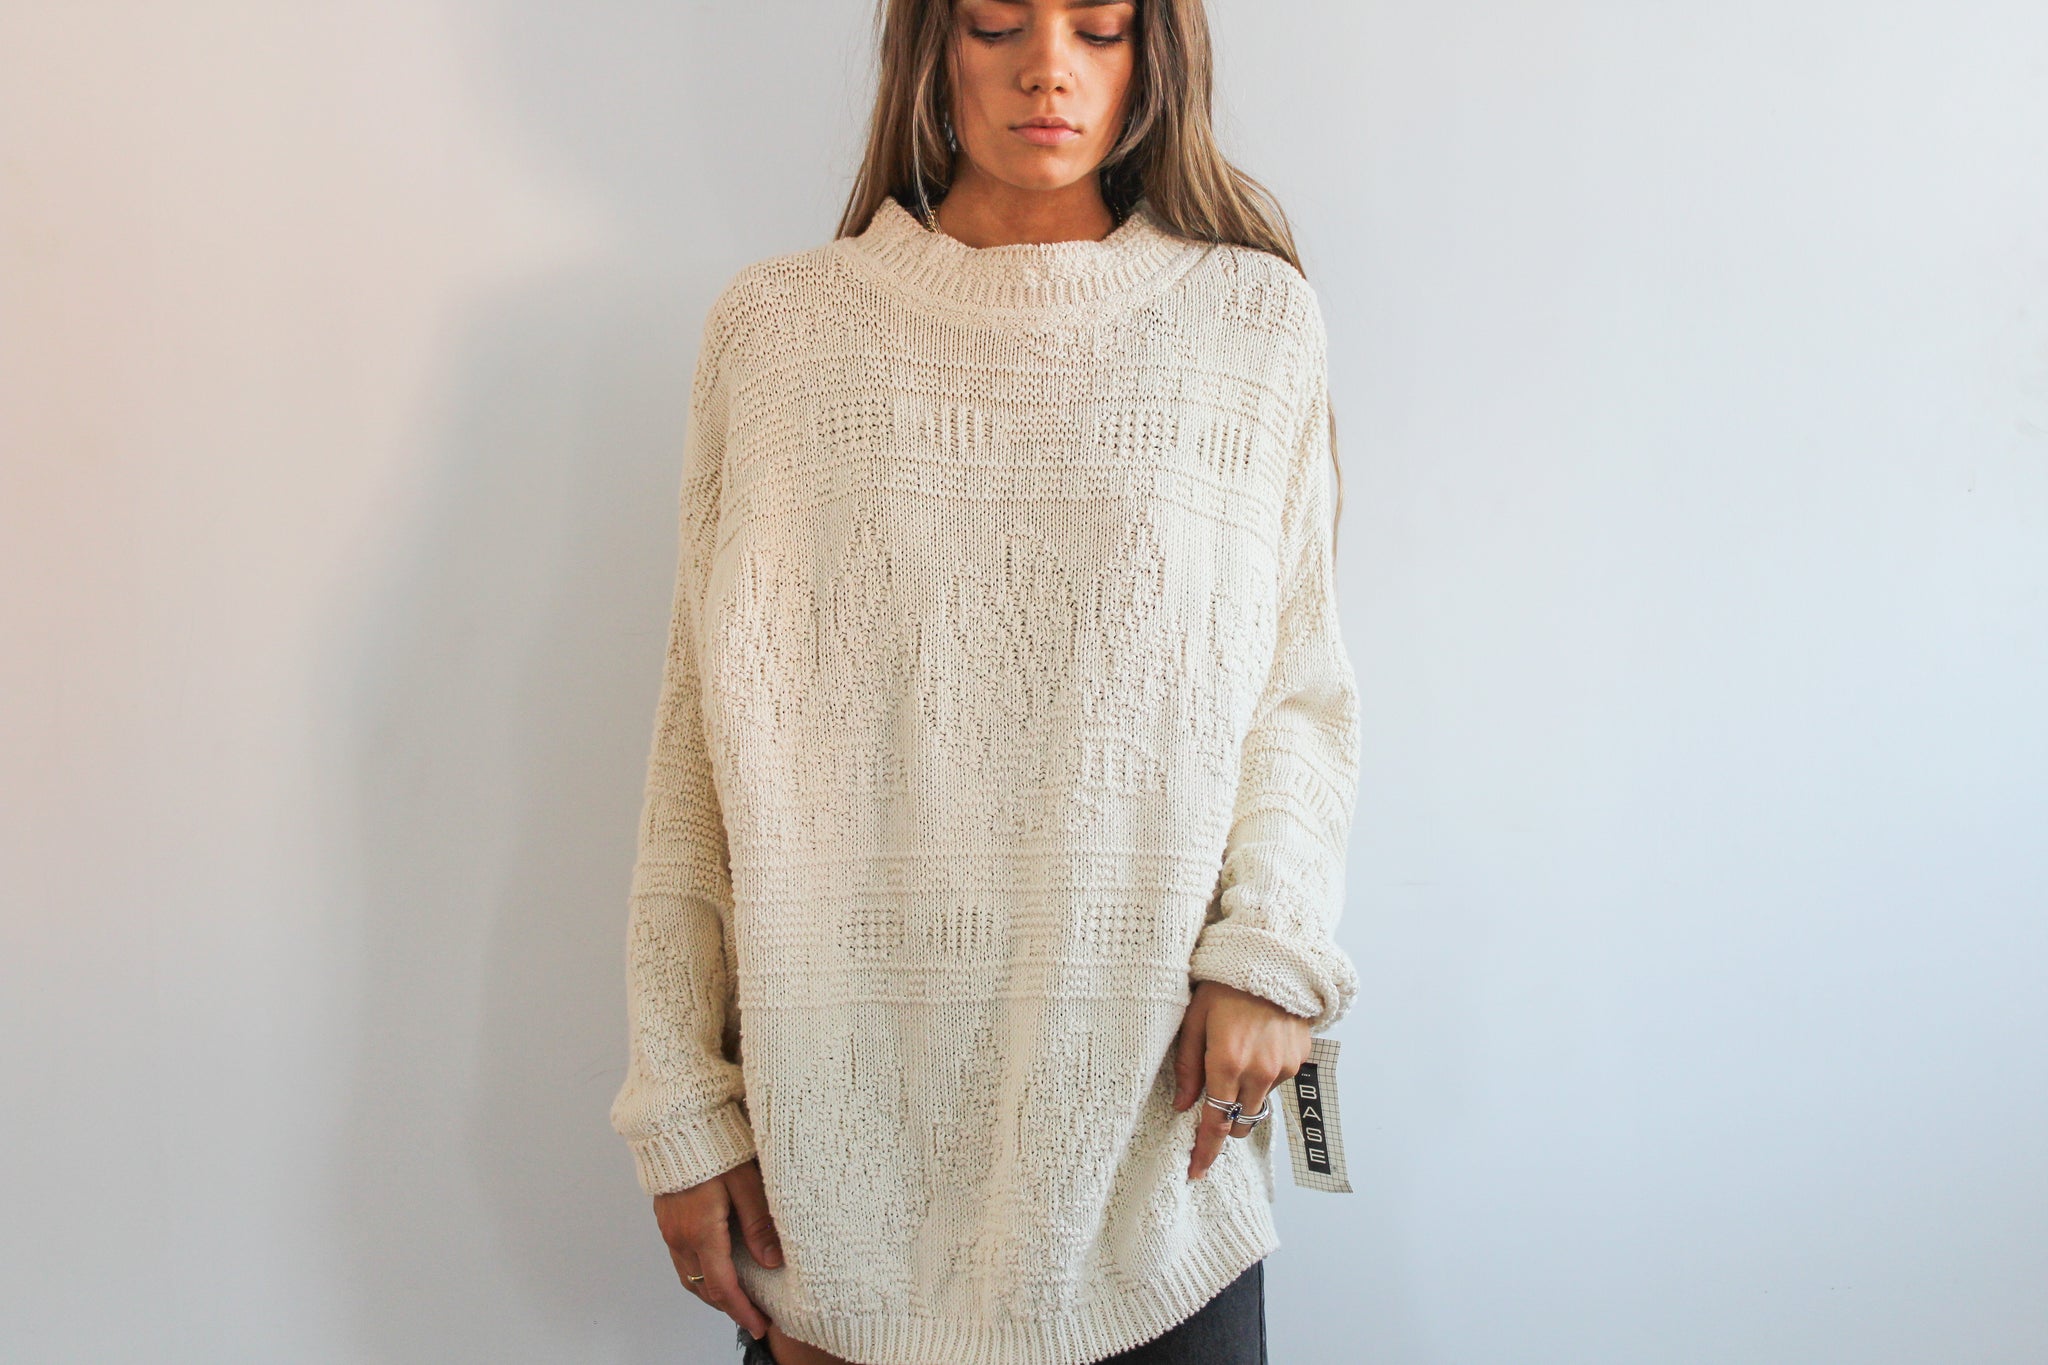 90s Knit Sweater